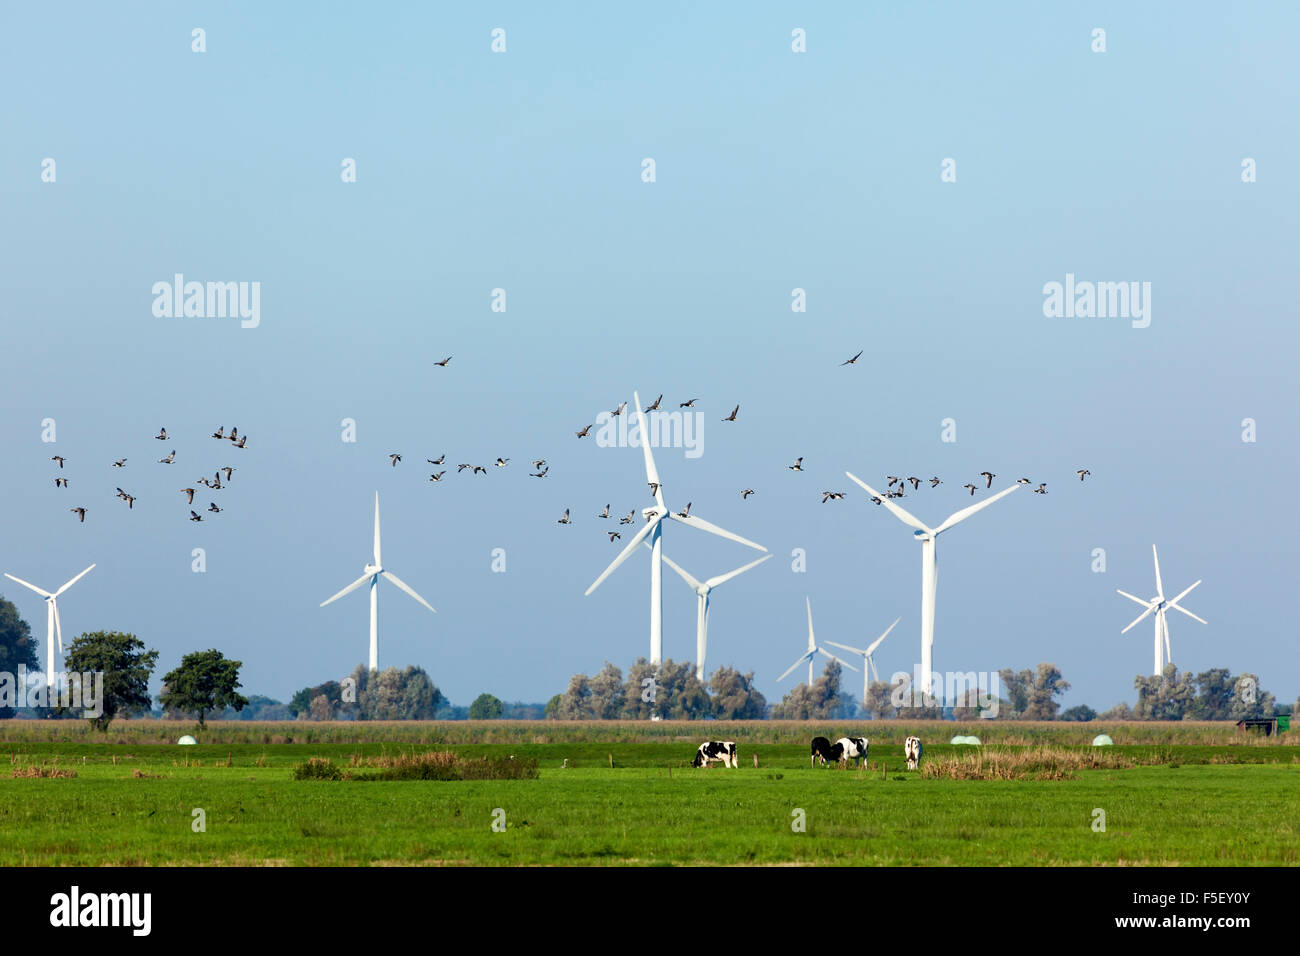 Wild geese flying over northern german landscape with wind turbines Stock Photo